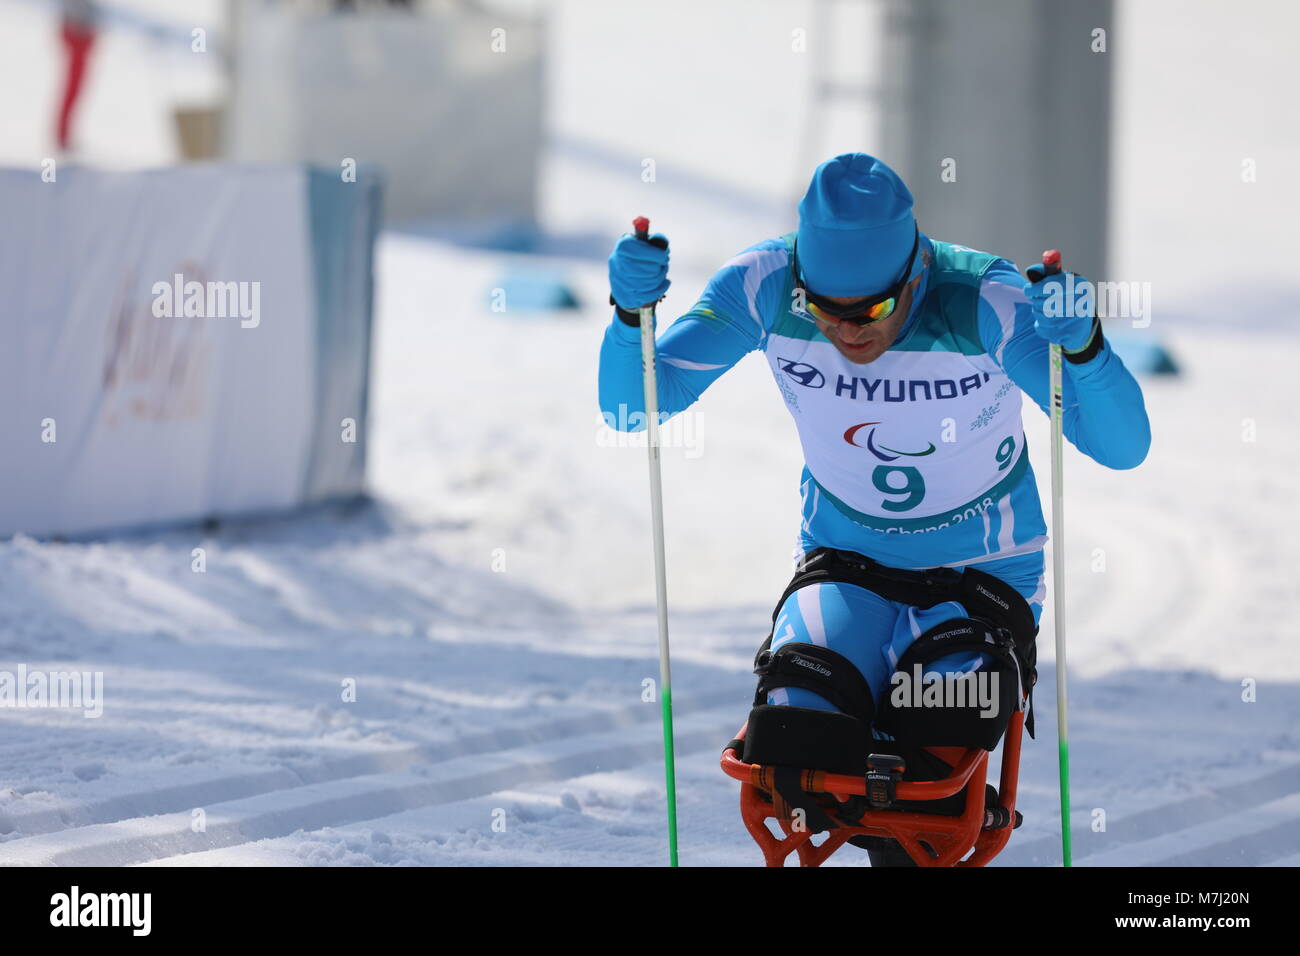 Pyeongchang, South Korea. 11th Mar, 2018. Sergey Ussoltsev from Kazakhstan (rank 15) seen during the Cross-Country Skiing Men's 15km Sitting.The Pyeongchang Paralympics 2018 Games will be held from March 09 until March 18 2018 in Pyeongchang. Credit: Ilona Berezowska/SOPA Images/ZUMA Wire/Alamy Live News Stock Photo